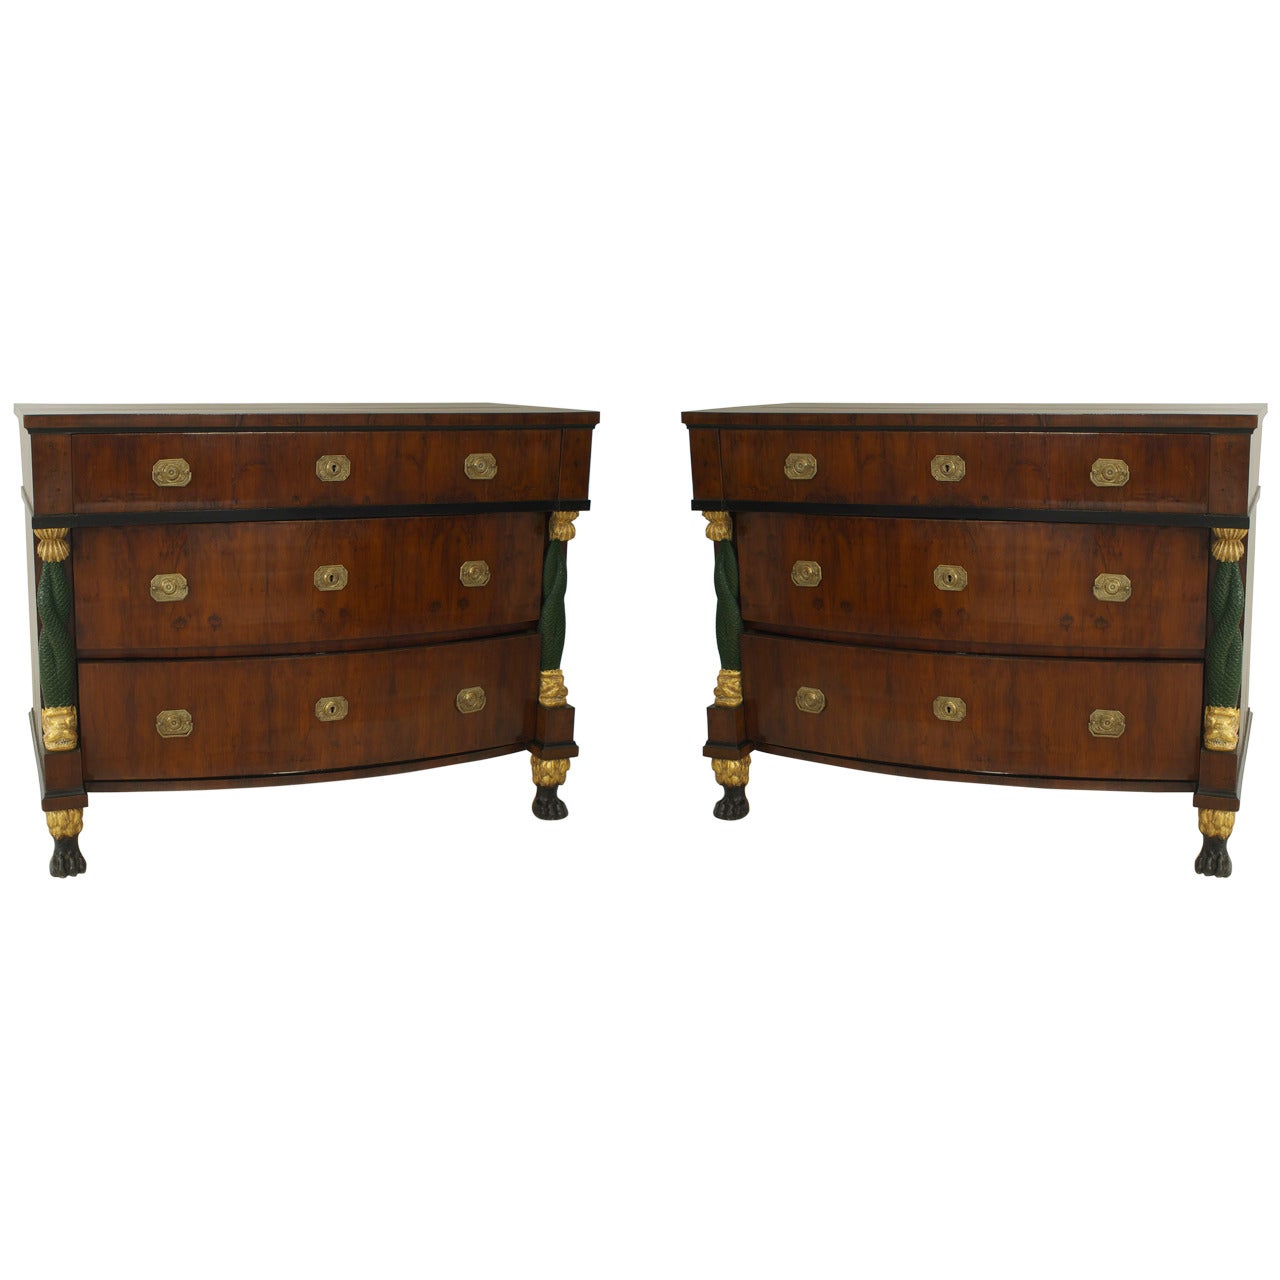 Pair of 19th Century Baltic Parcel-Gilt Mahogany Chests